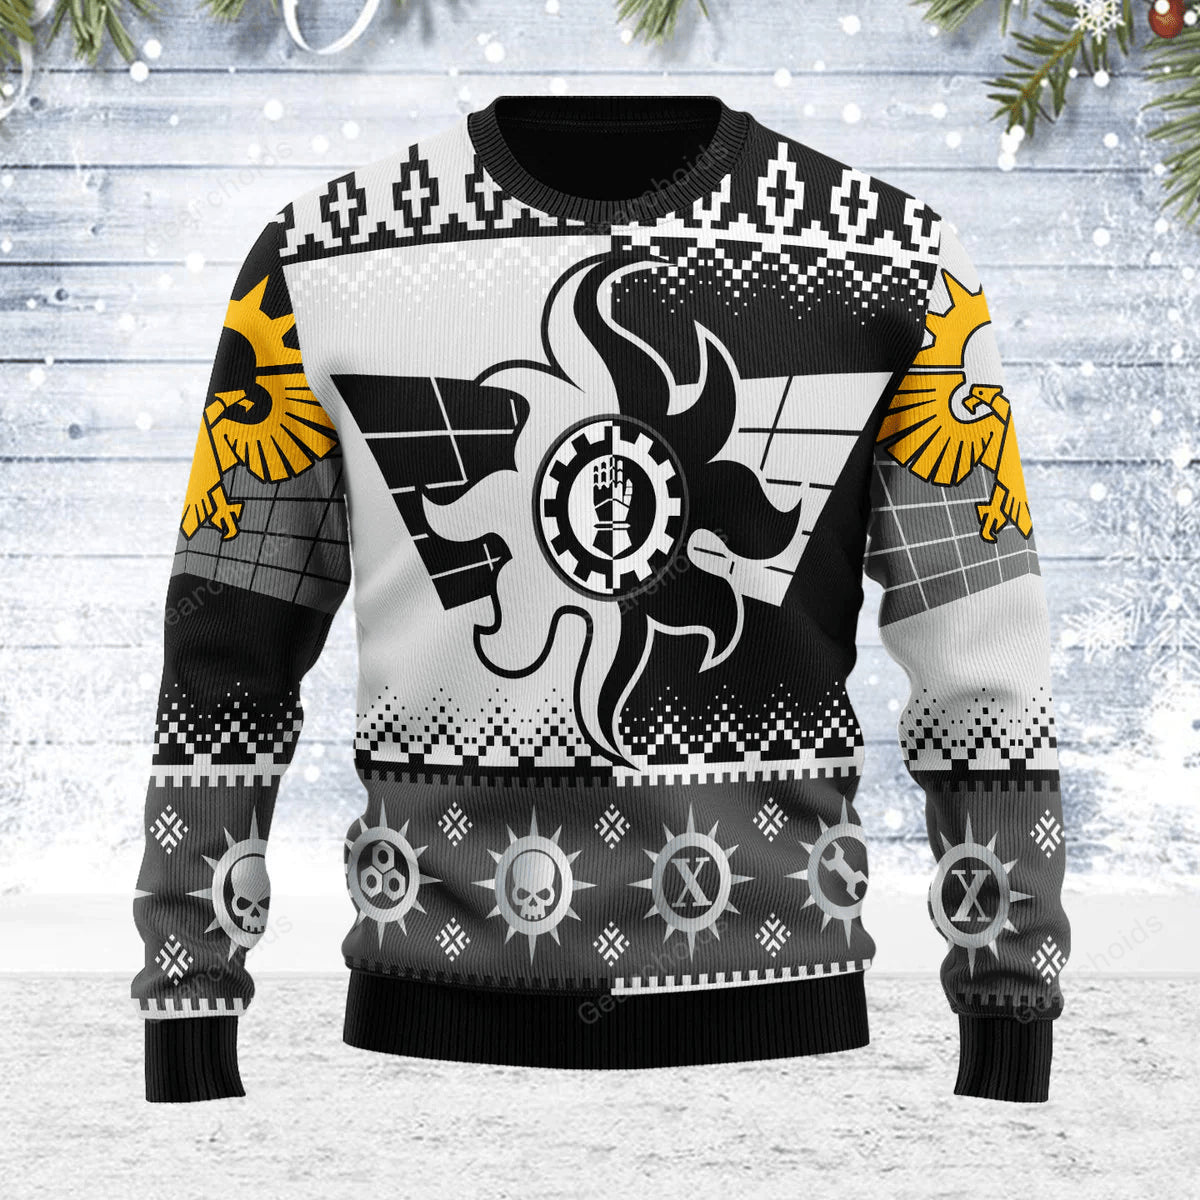 Warhammer Iron Hands Iconic - Ugly Christmas Sweater